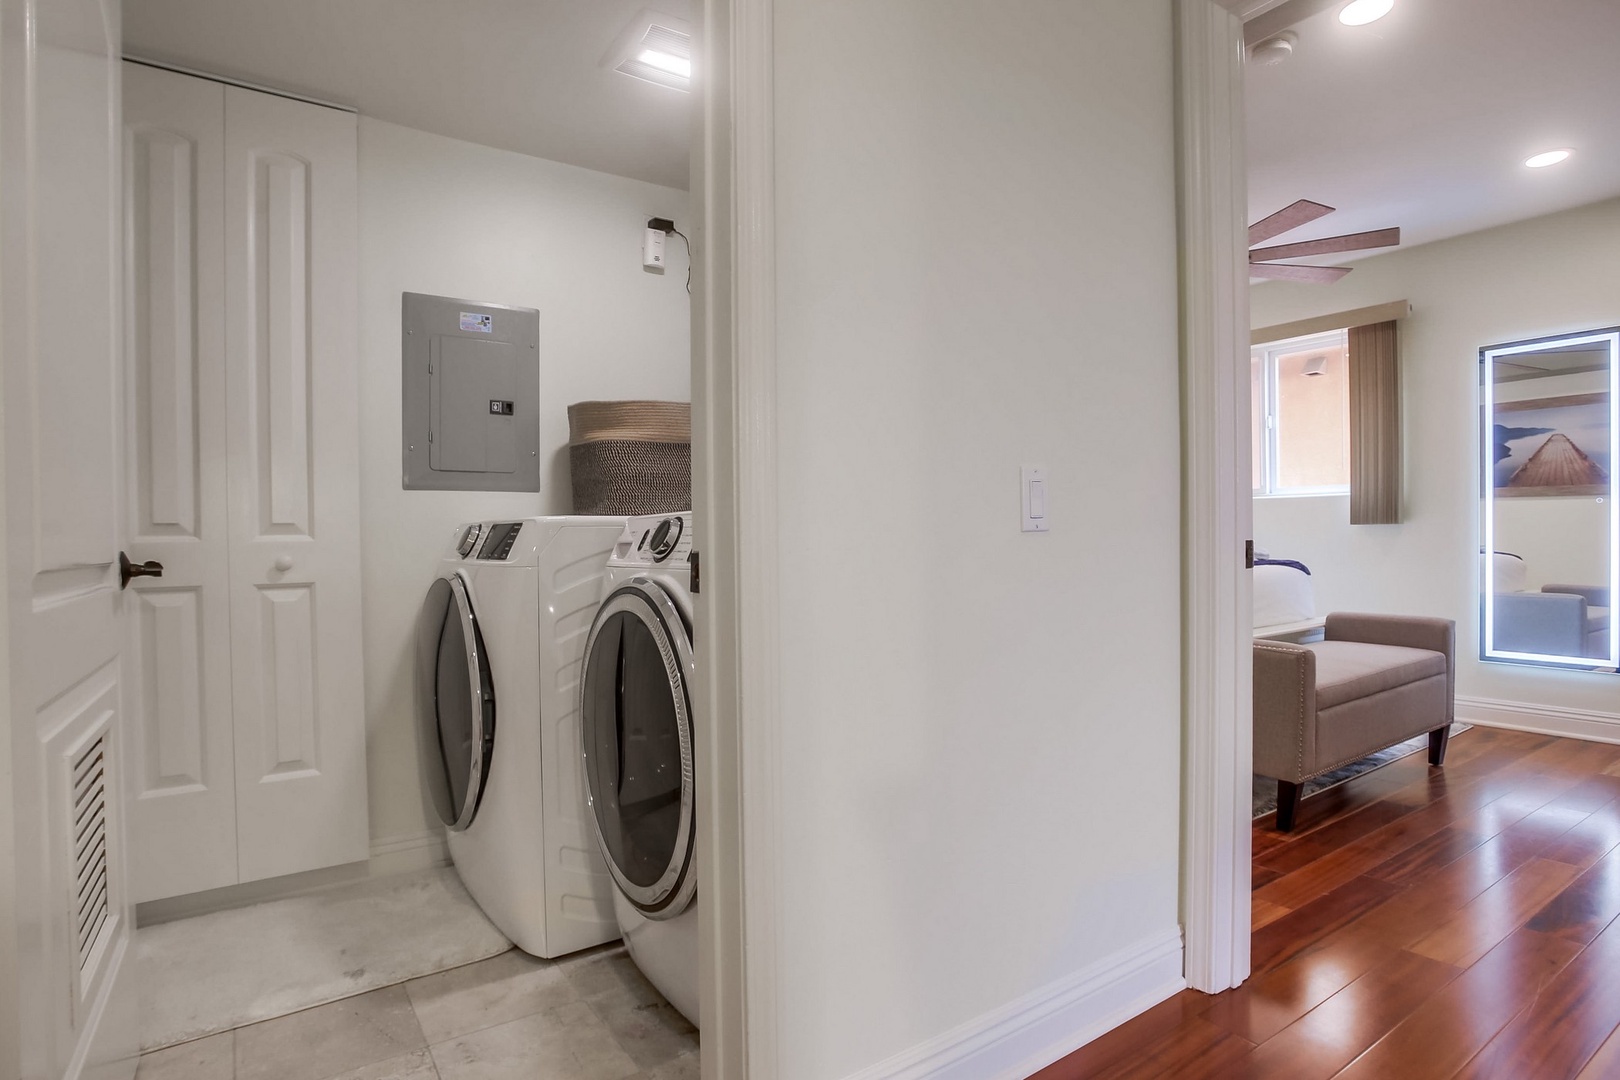 Full-size washer/dryer on second floor